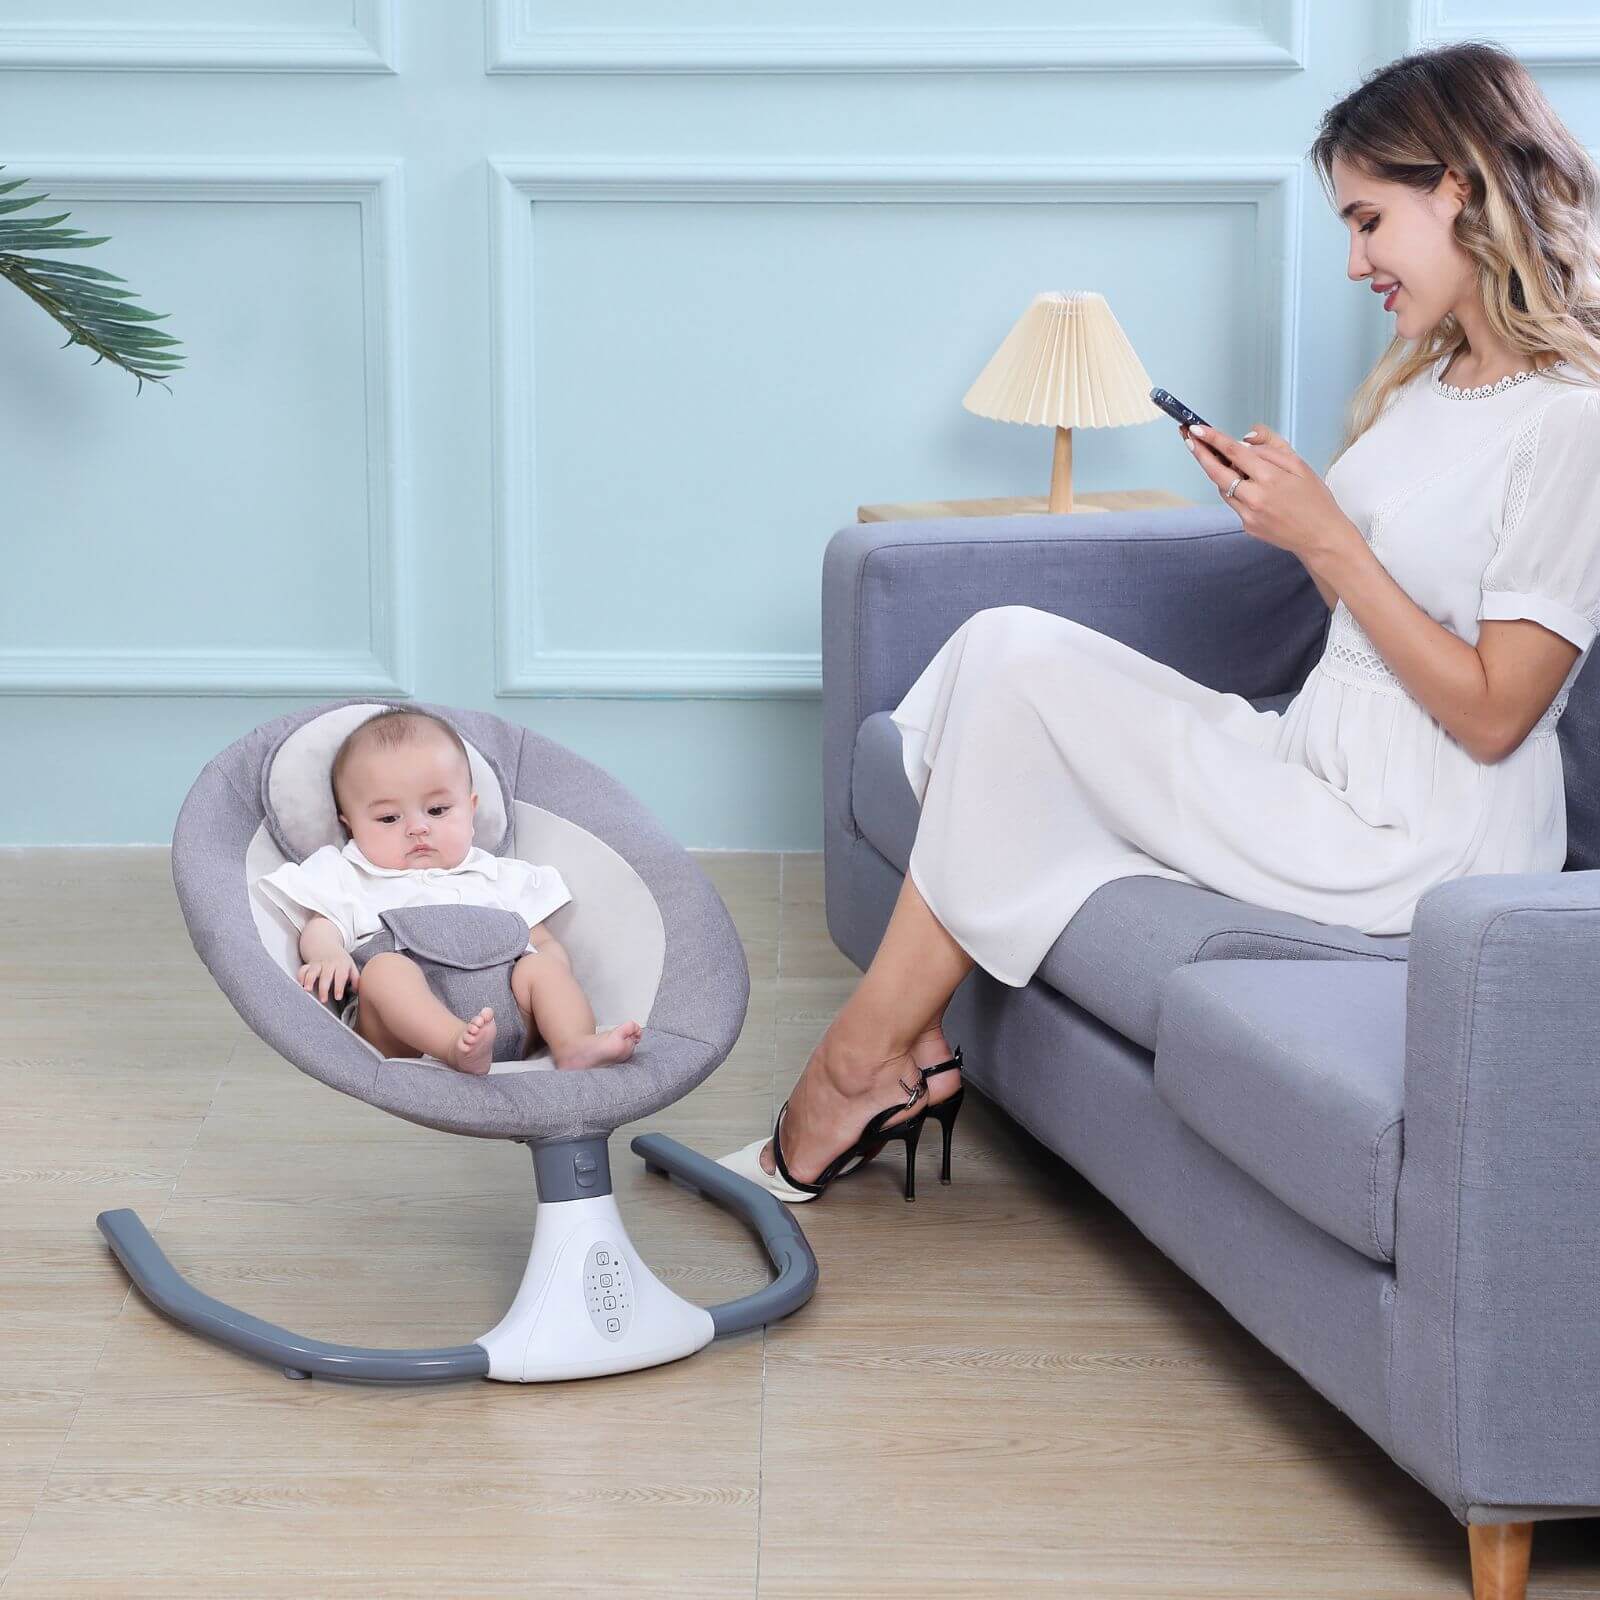 Smart Baby Swing Cradle Rocker Bed/ Bouncer Seat Infant Crib Remote Chair with a mum and baby